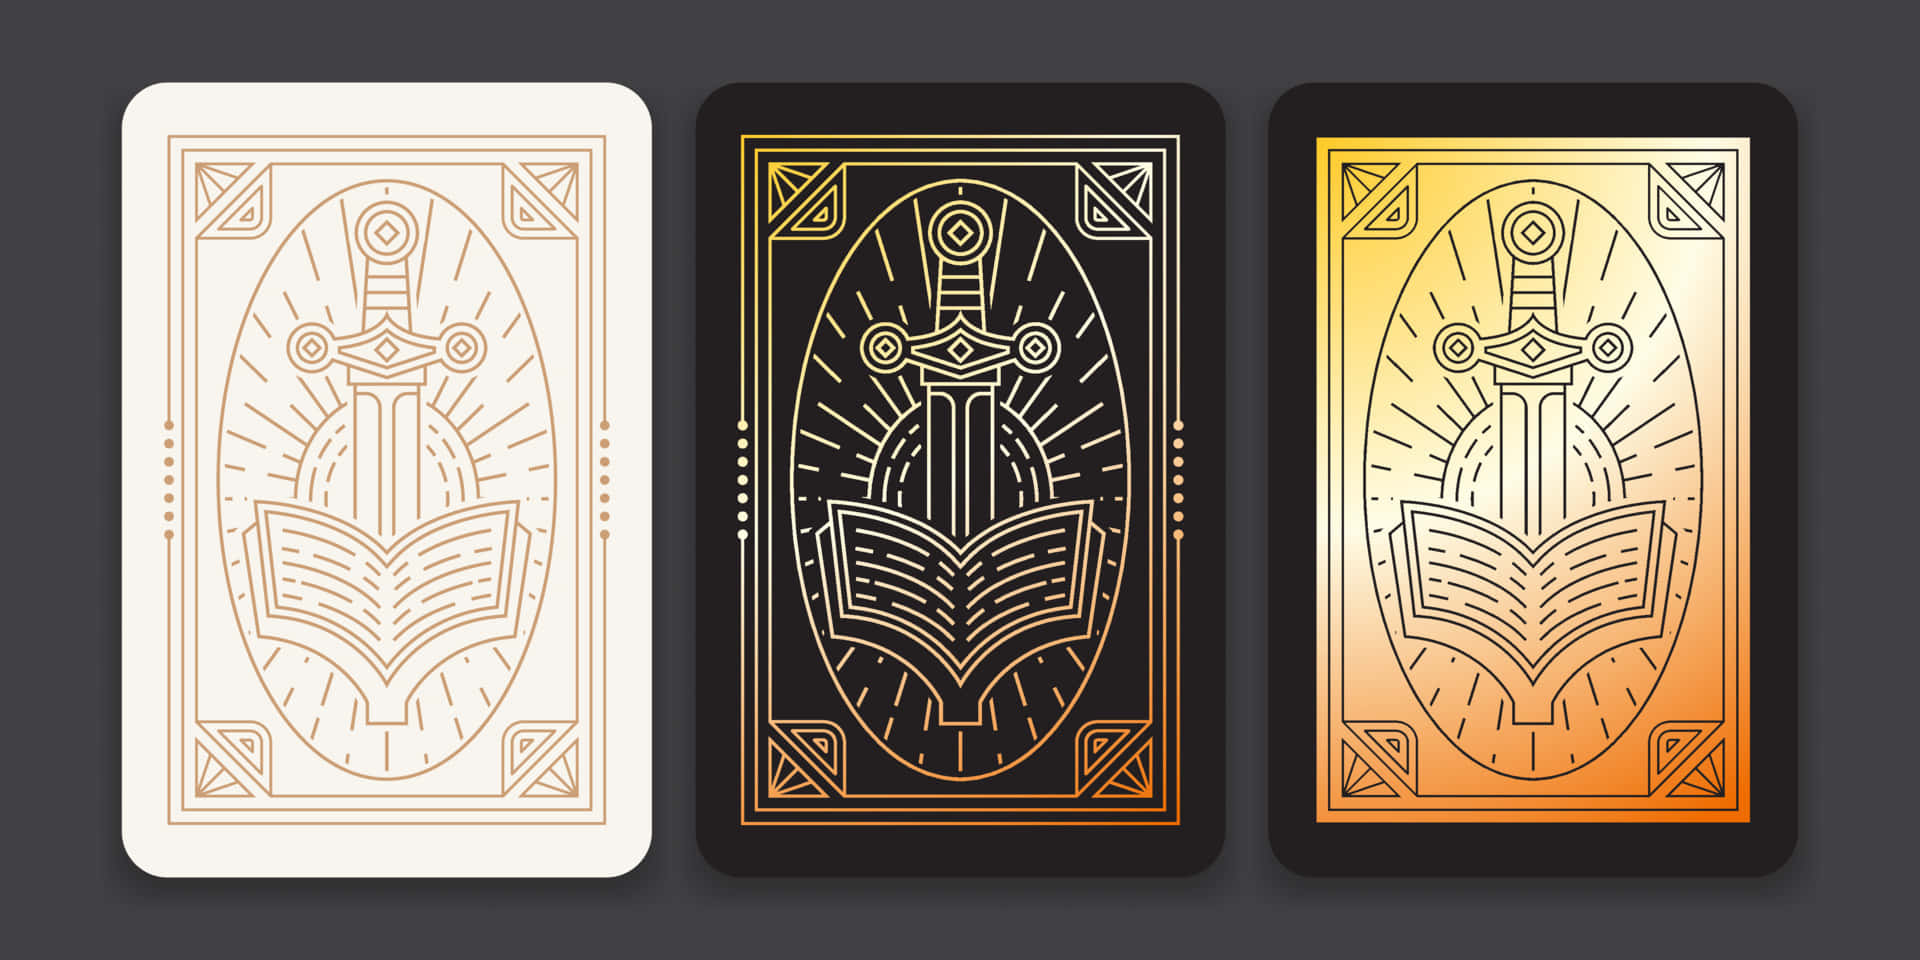 Mysterious Tarot Card Background with Astrological Symbols and Muted Tones